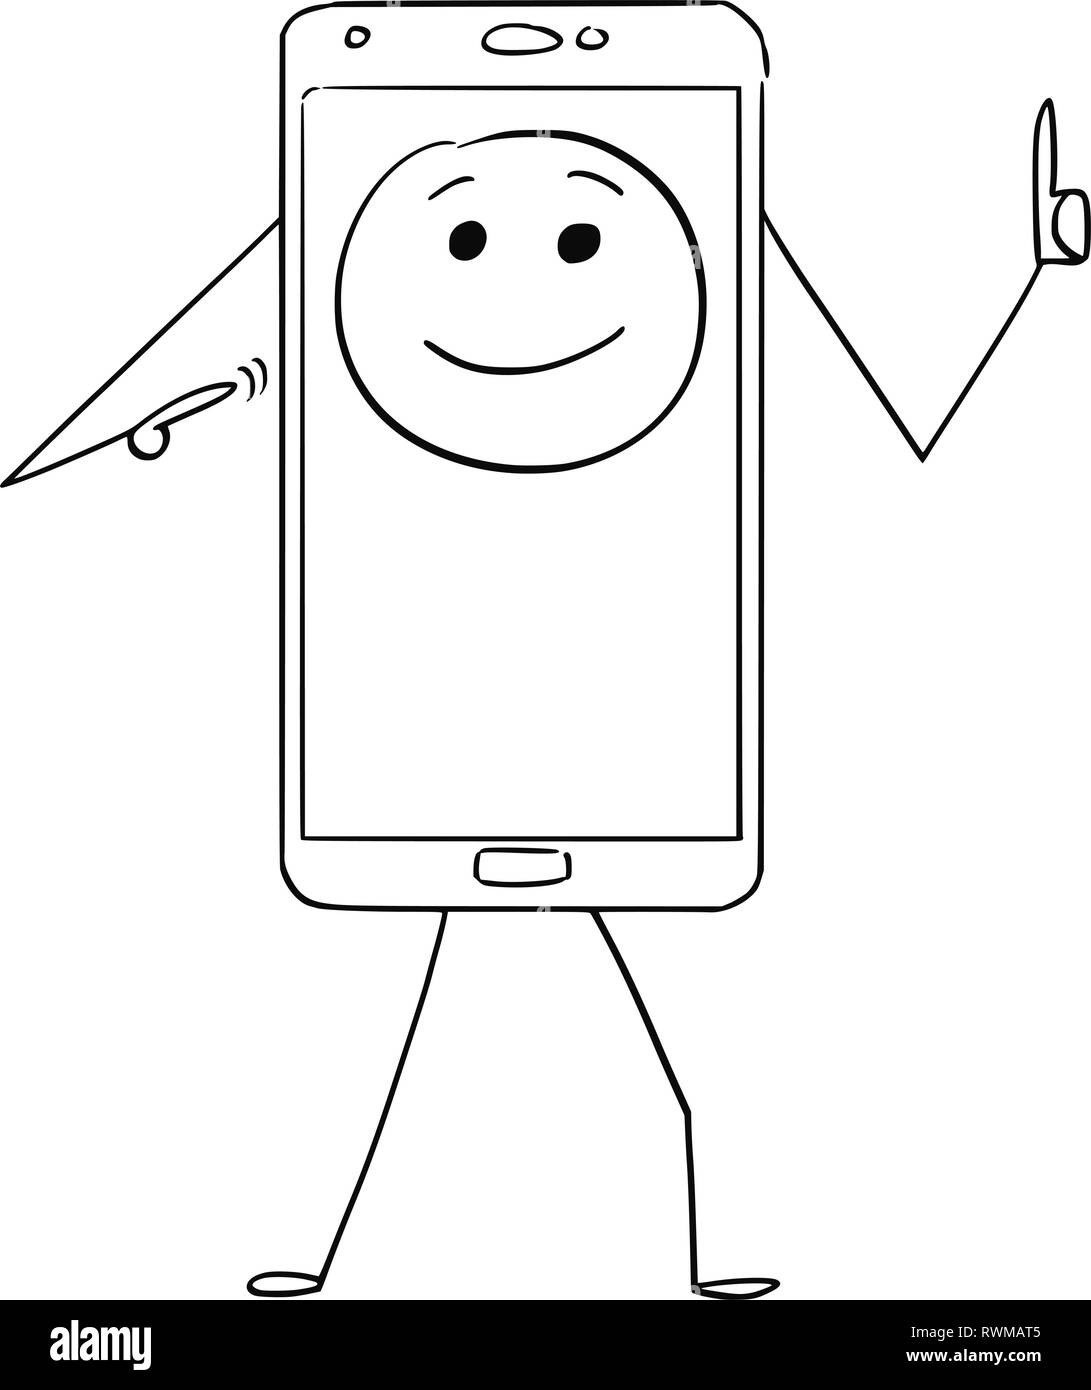 Cartoon of Mobile Phone Character With Emoticon on Display as Head Stock Vector